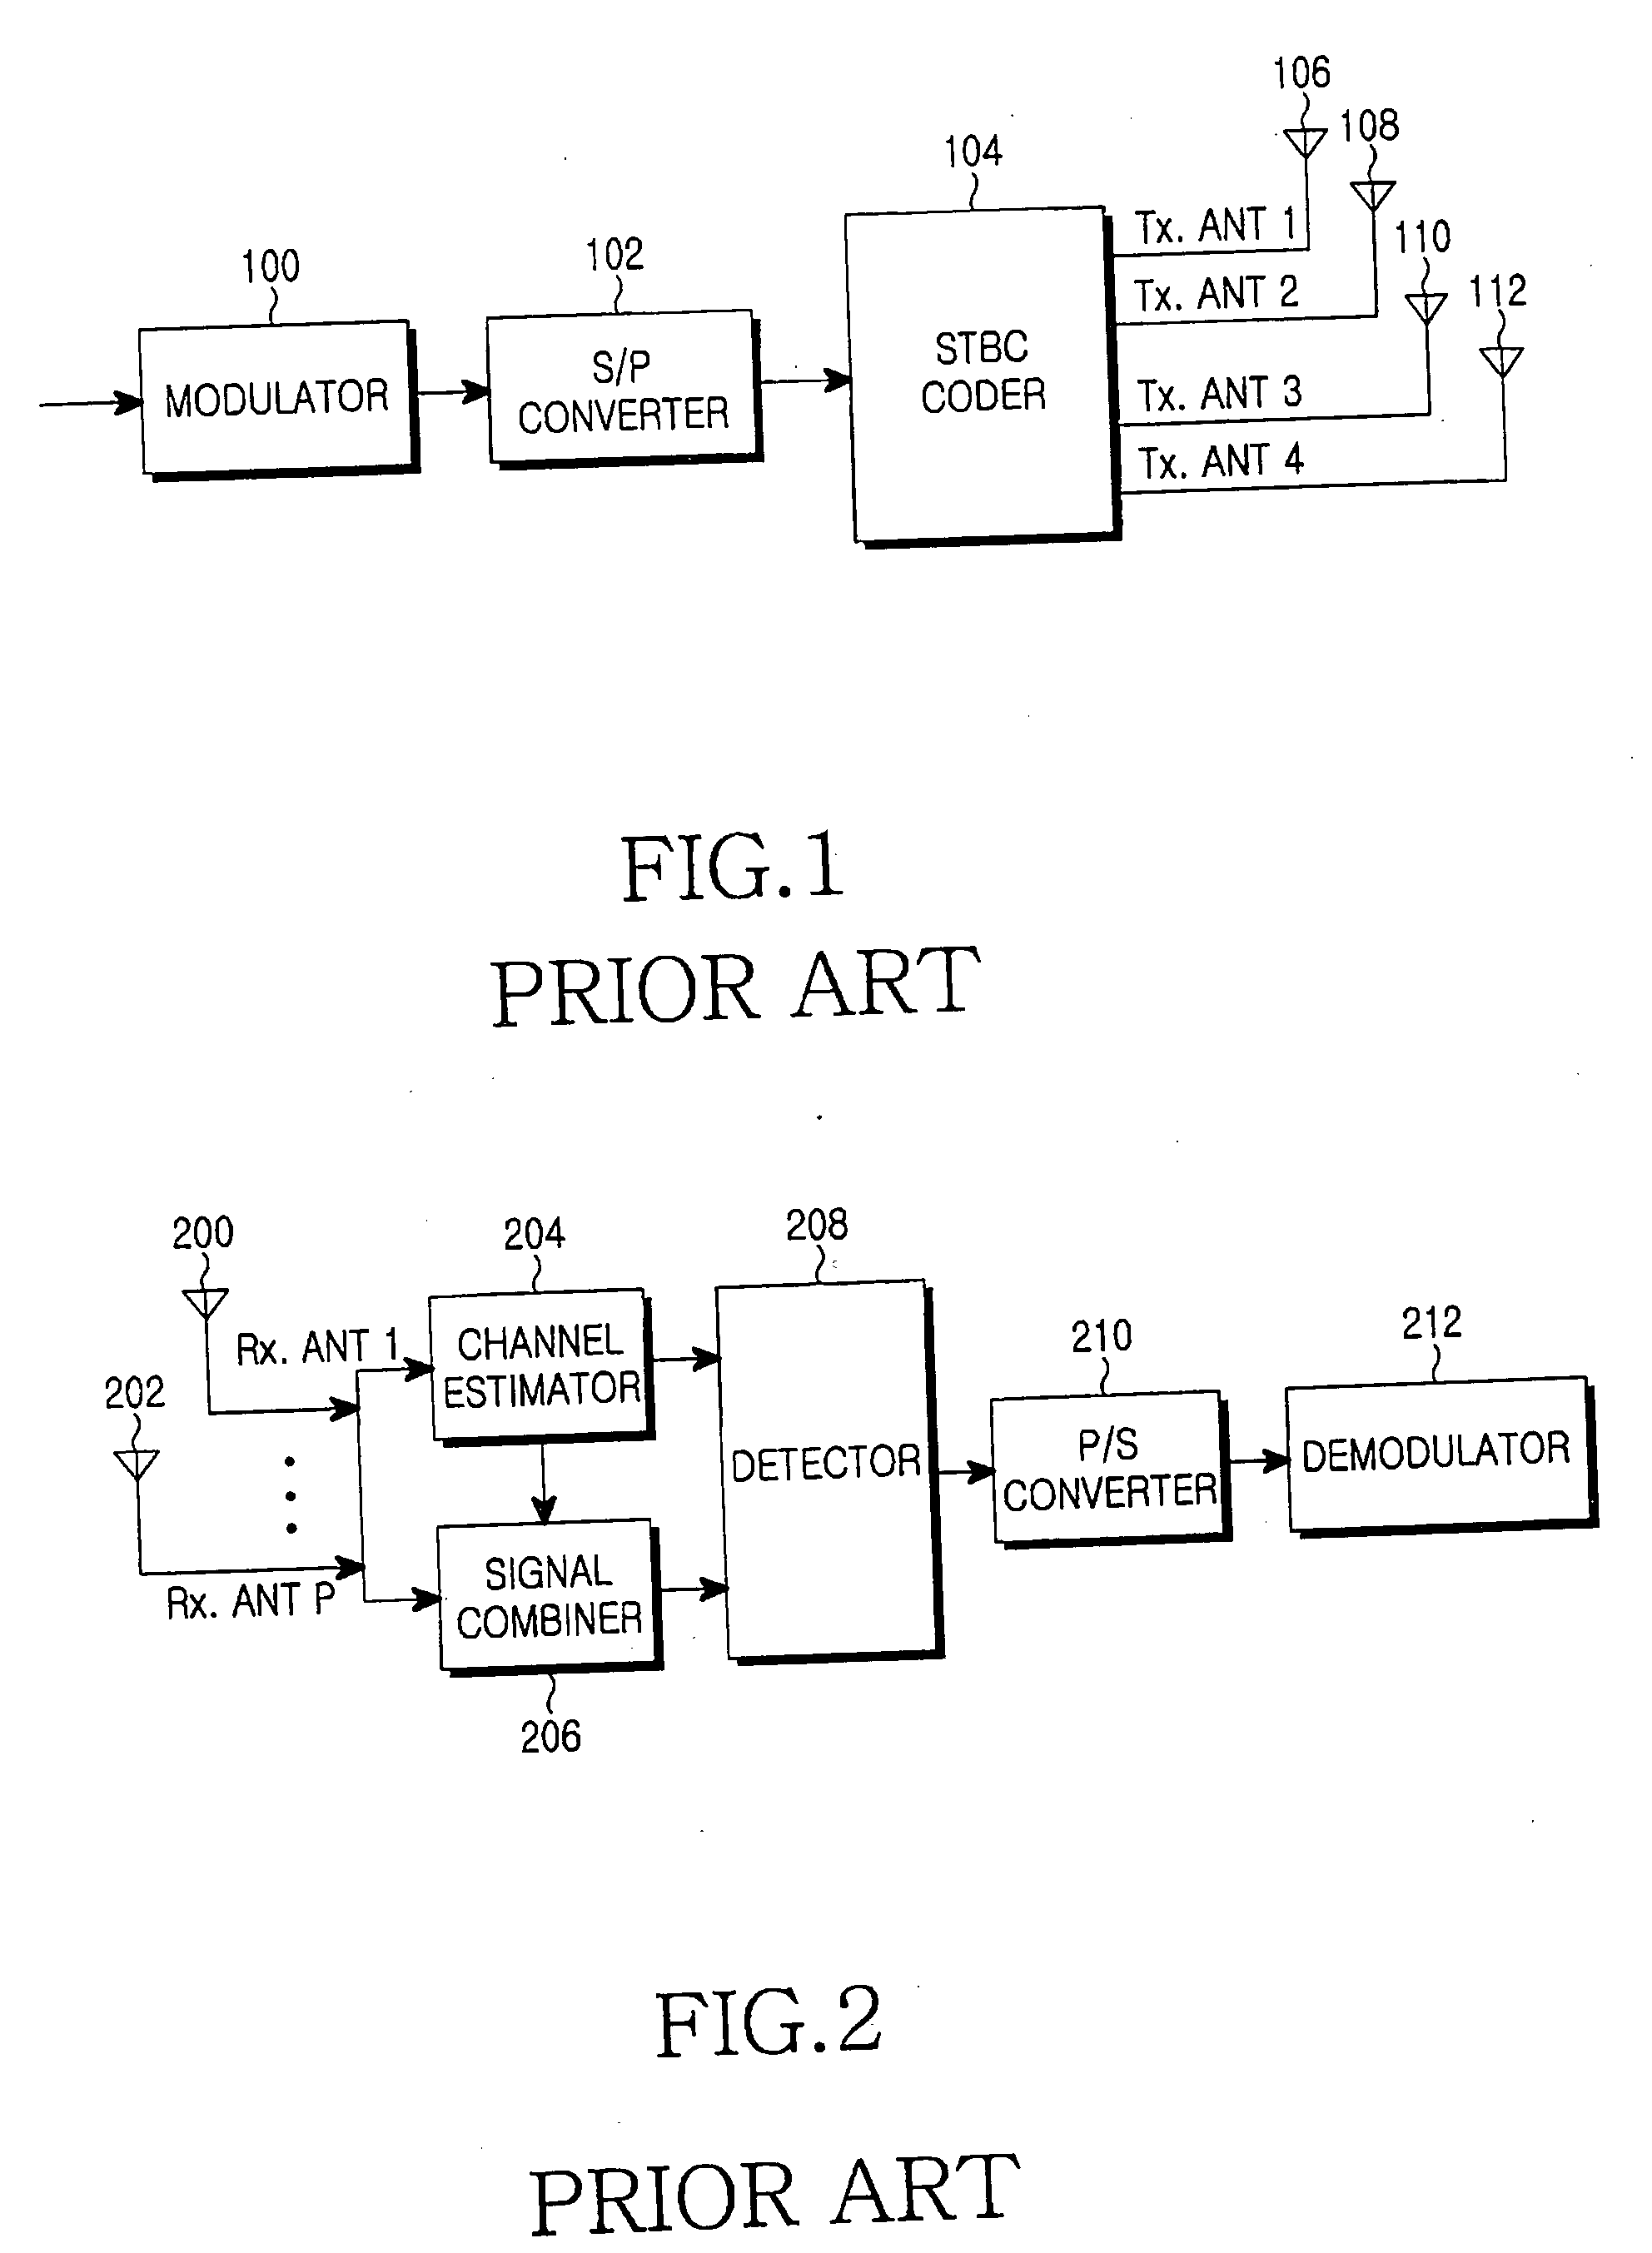 Apparatus and method for full-diversity, full-rate space-time block coding for even number of transmit antennas